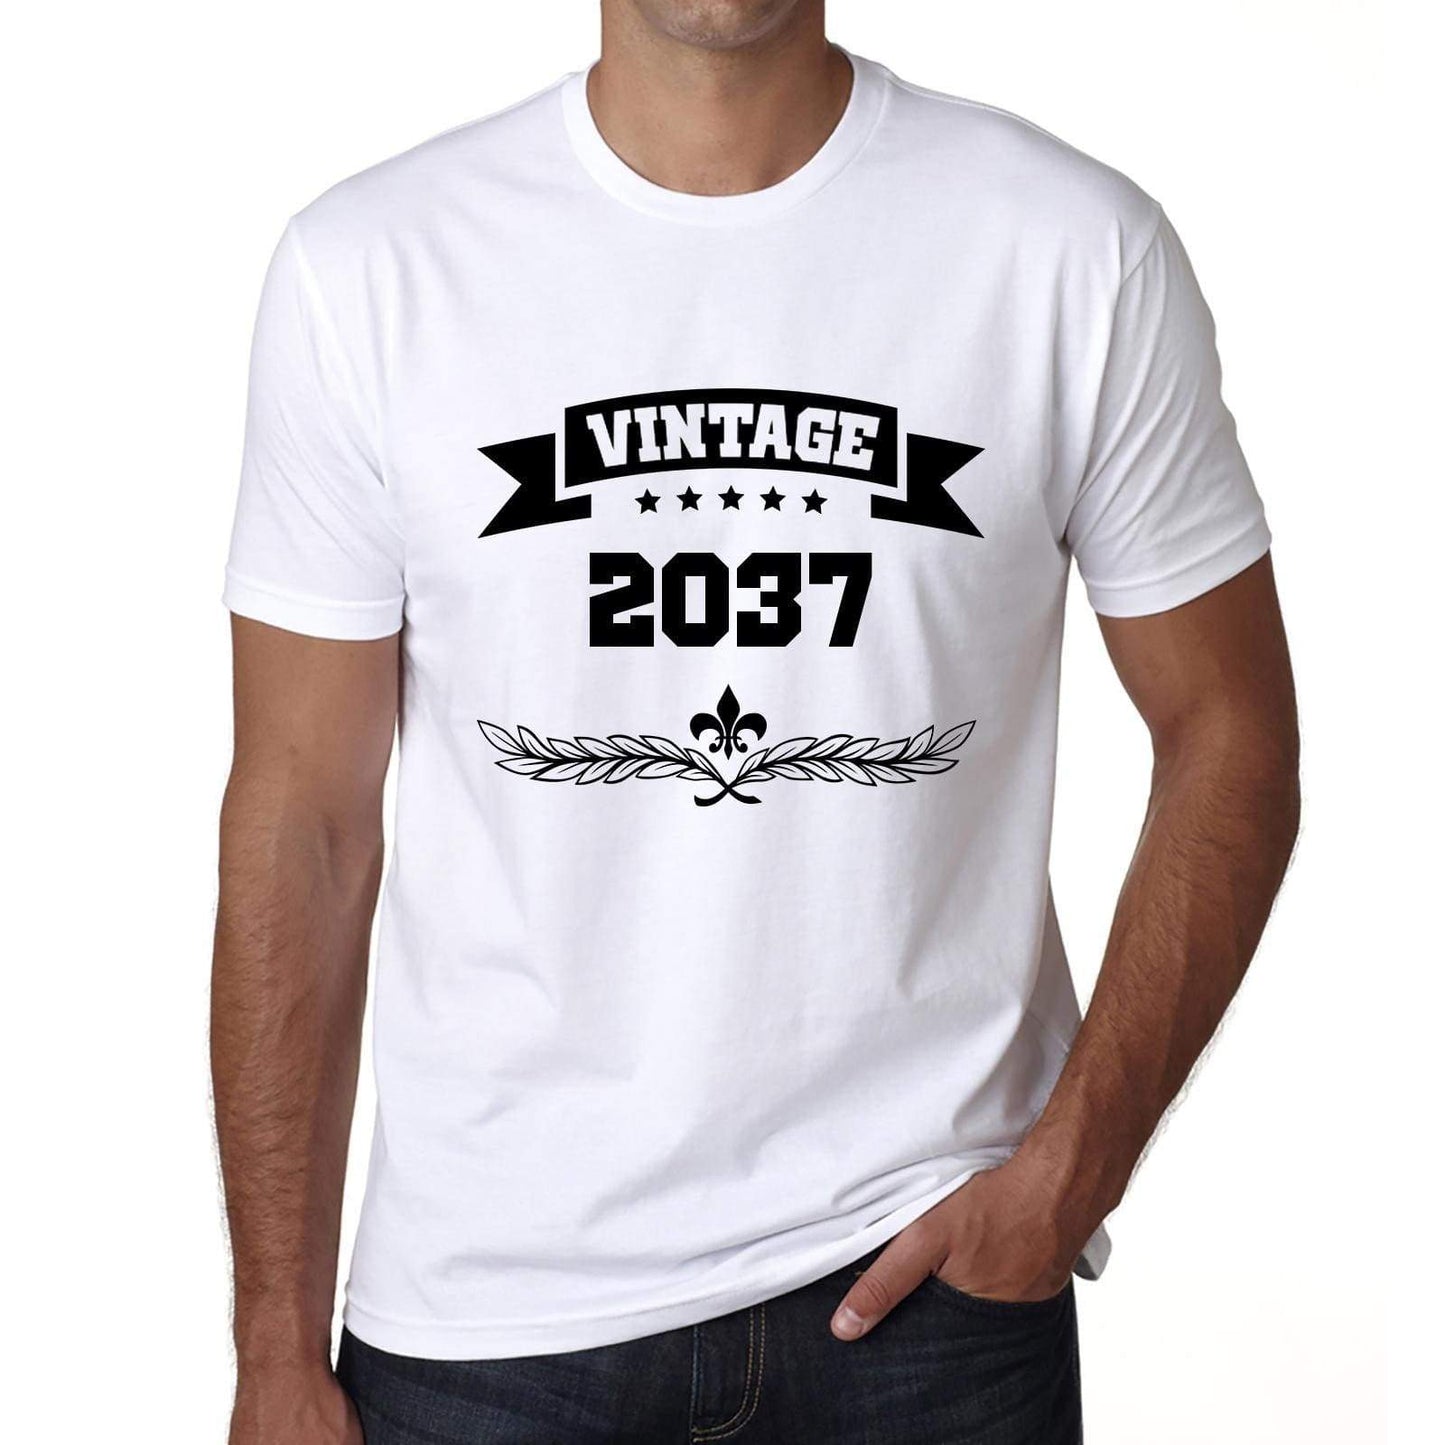 2037 Vintage Year White Mens Short Sleeve Round Neck T-Shirt 00096 - White / S - Casual